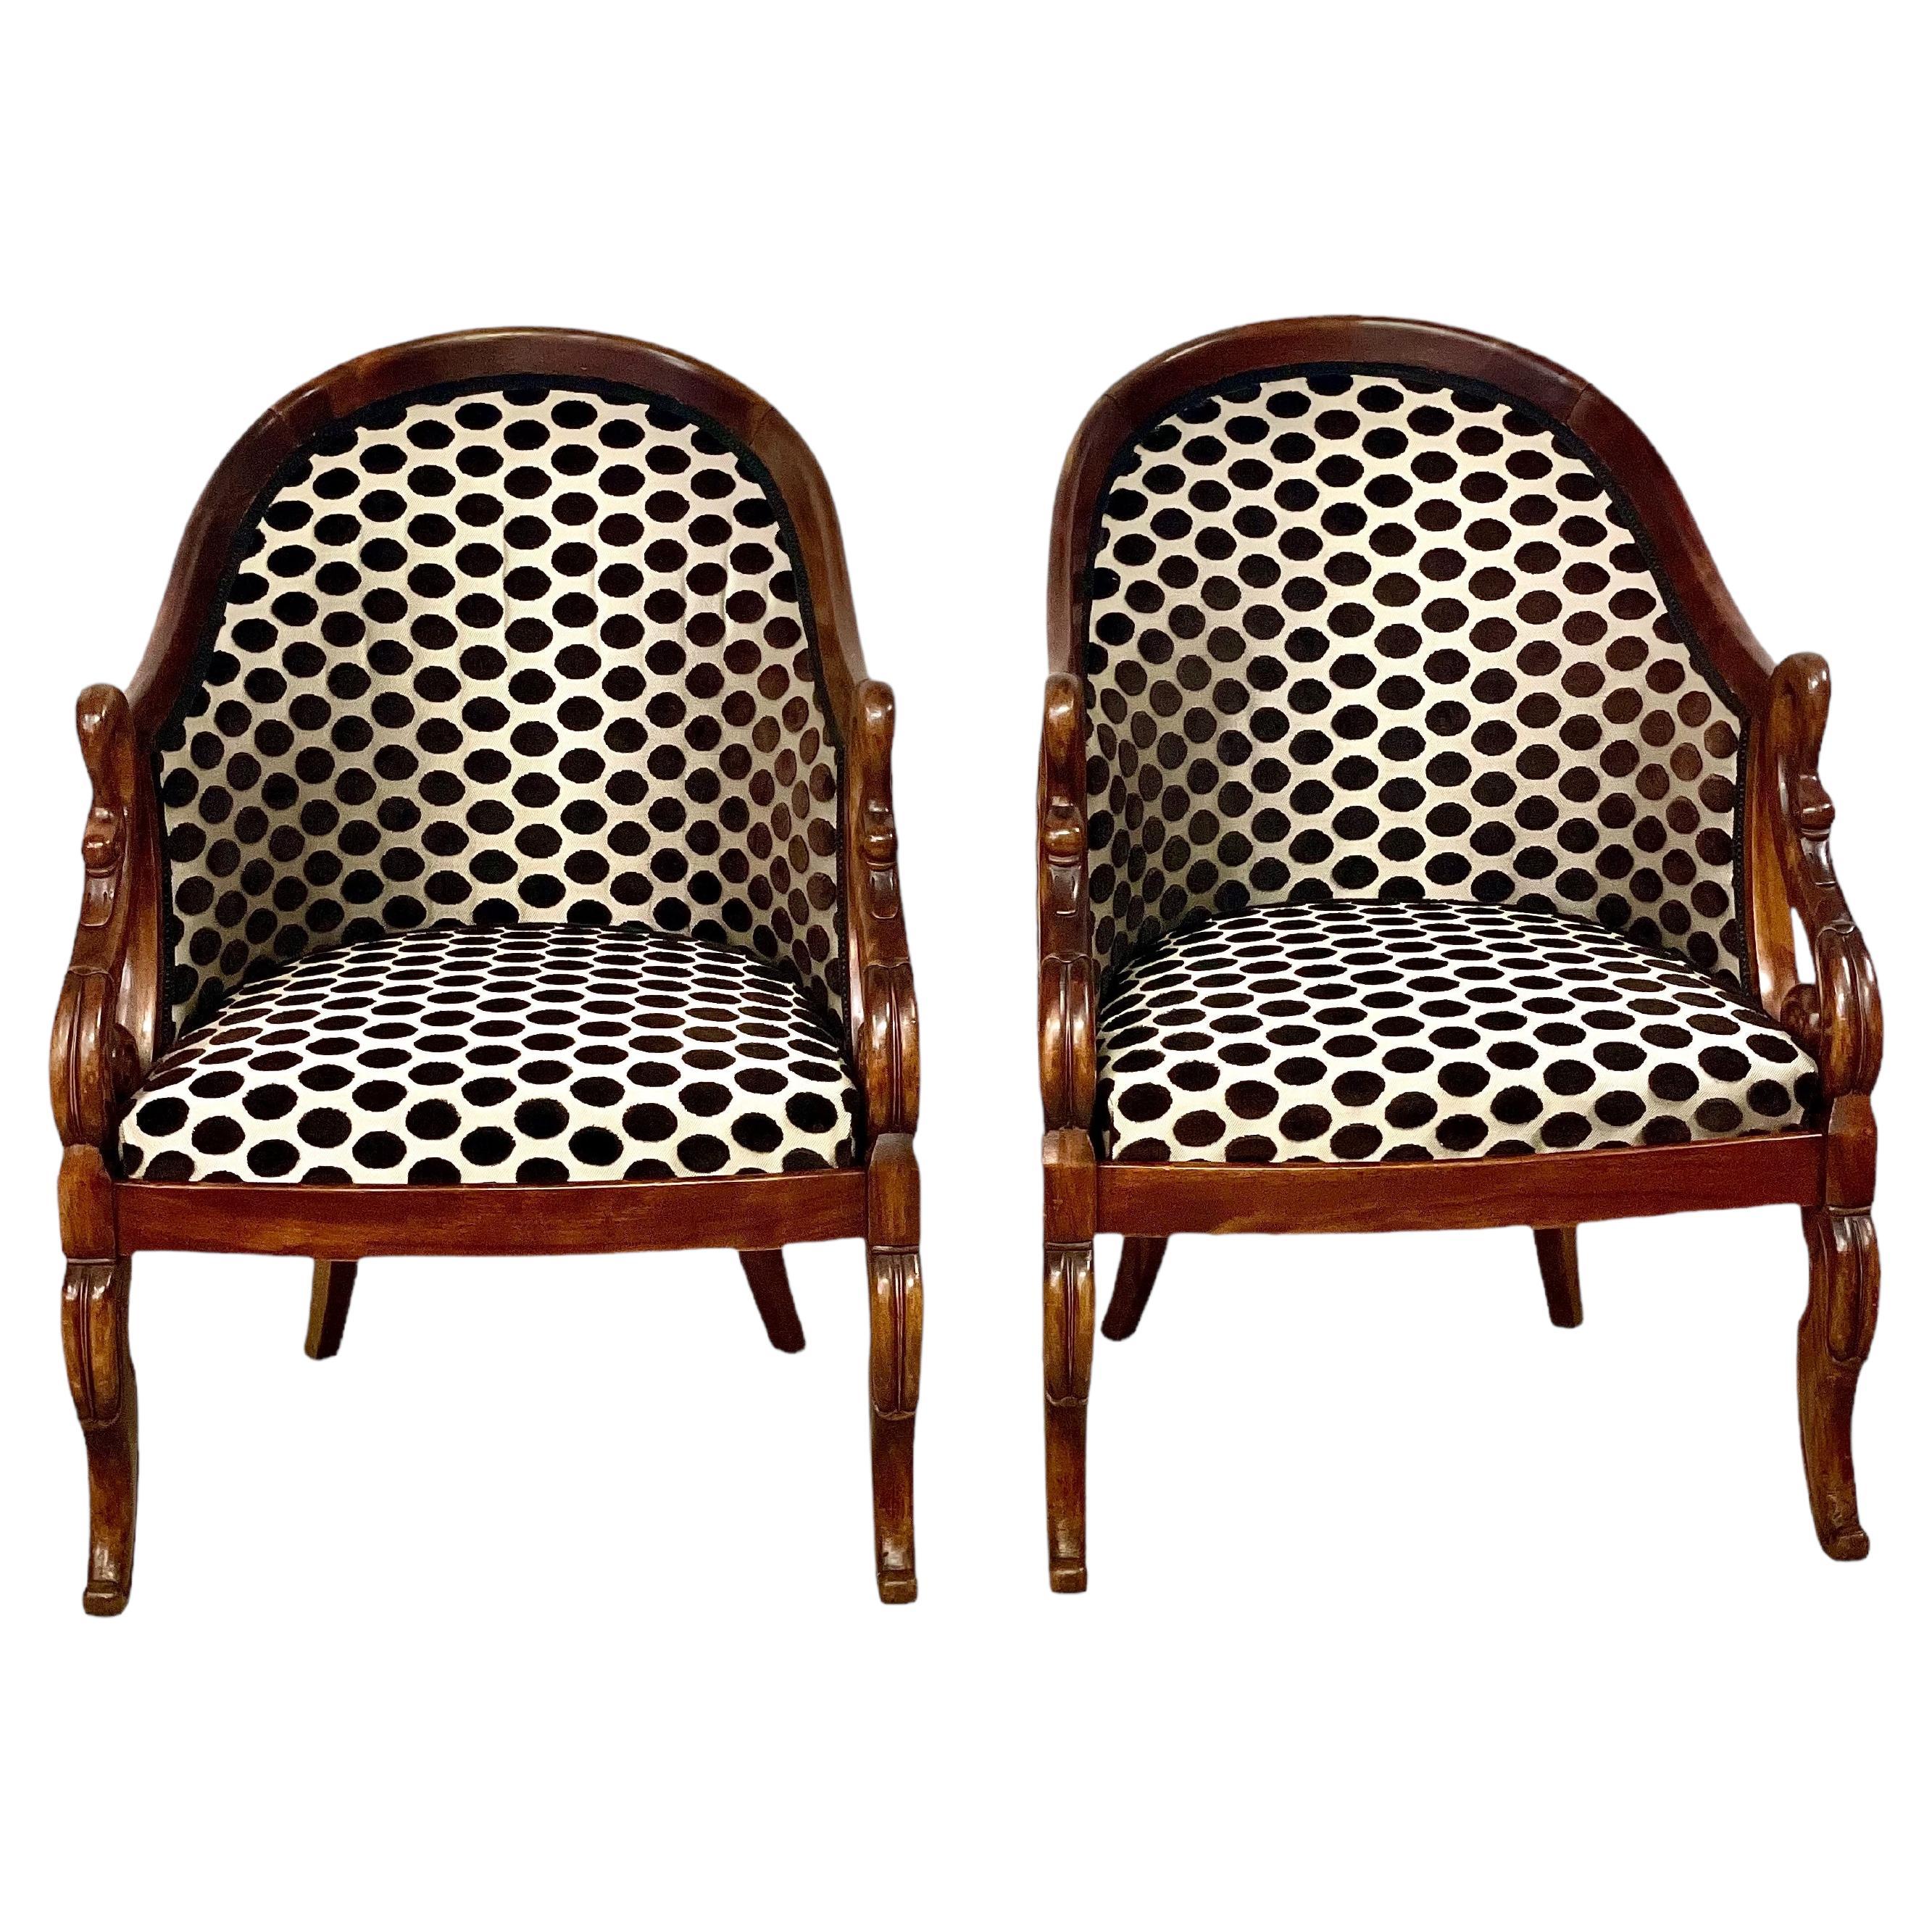 Pair of Empire Style Bergères Chairs with Gondola Shape Backrest